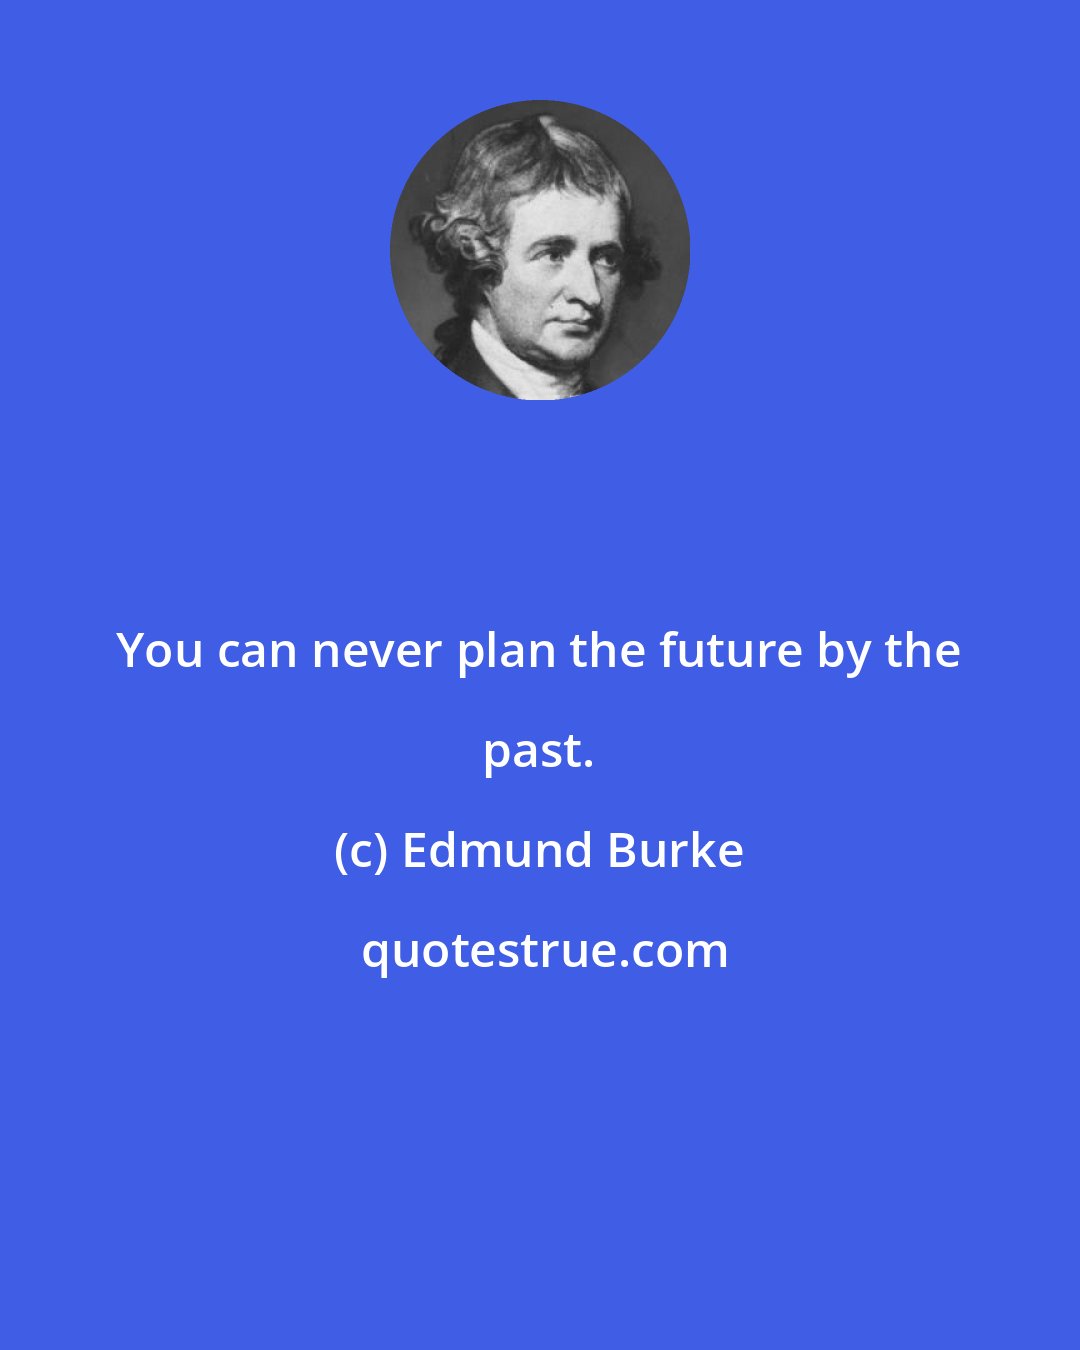 Edmund Burke: You can never plan the future by the past.